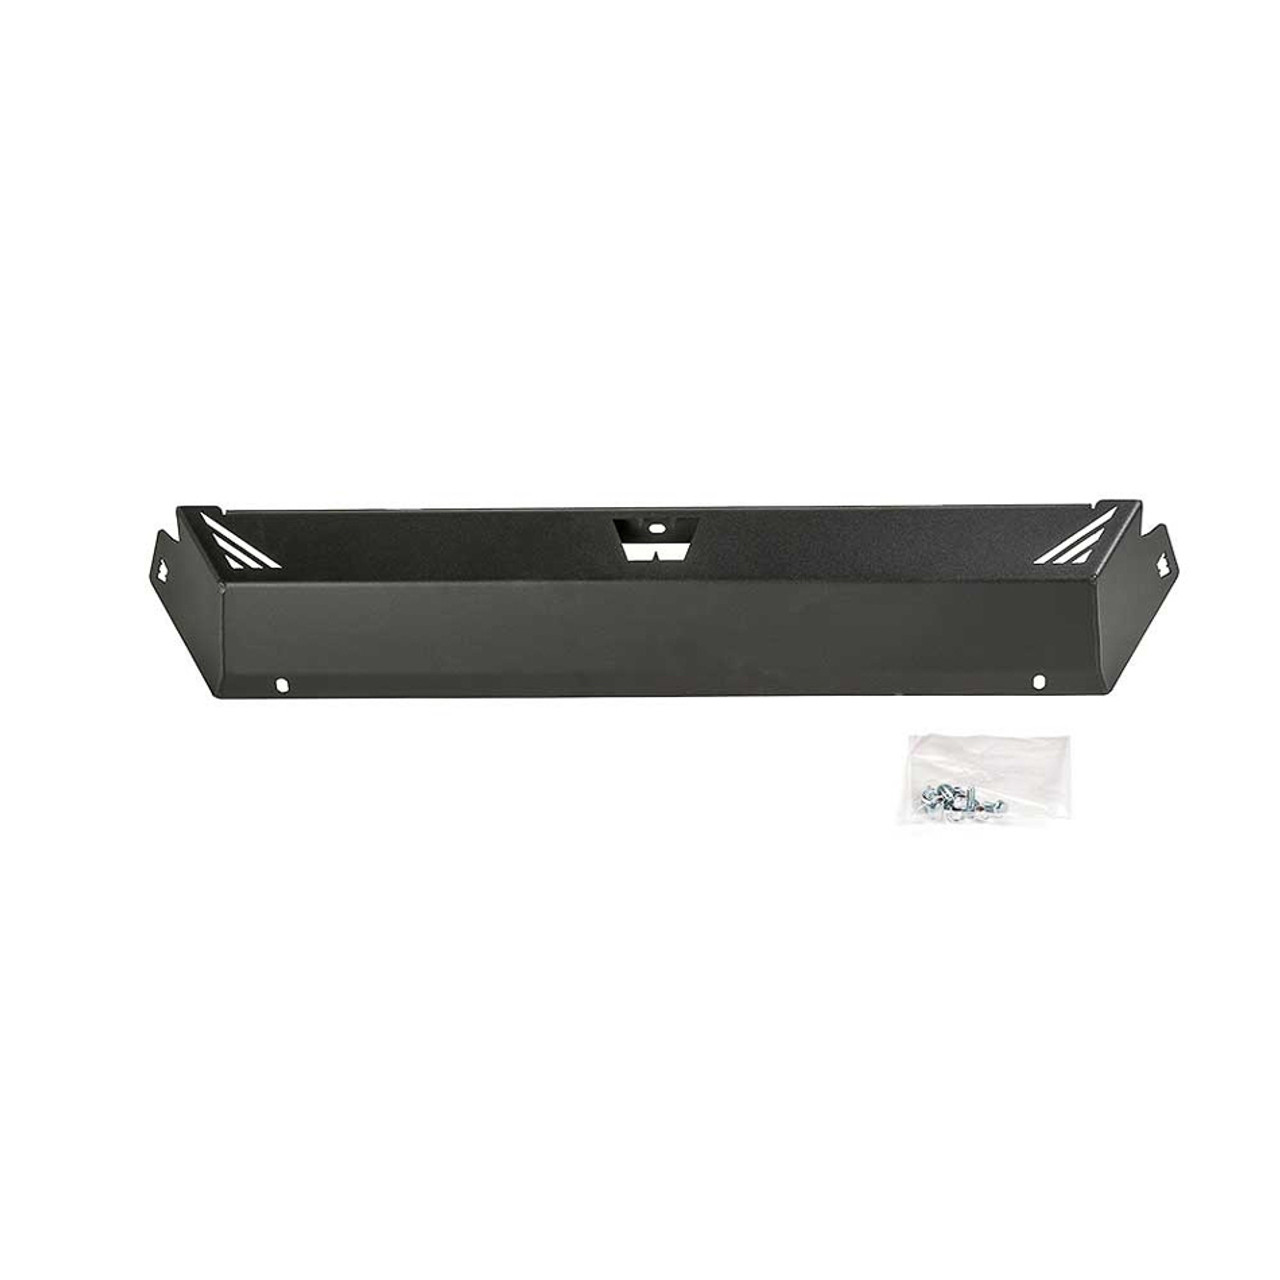 Warn 18- Jeep JL Skid Plate For Bumpers - WAR101445